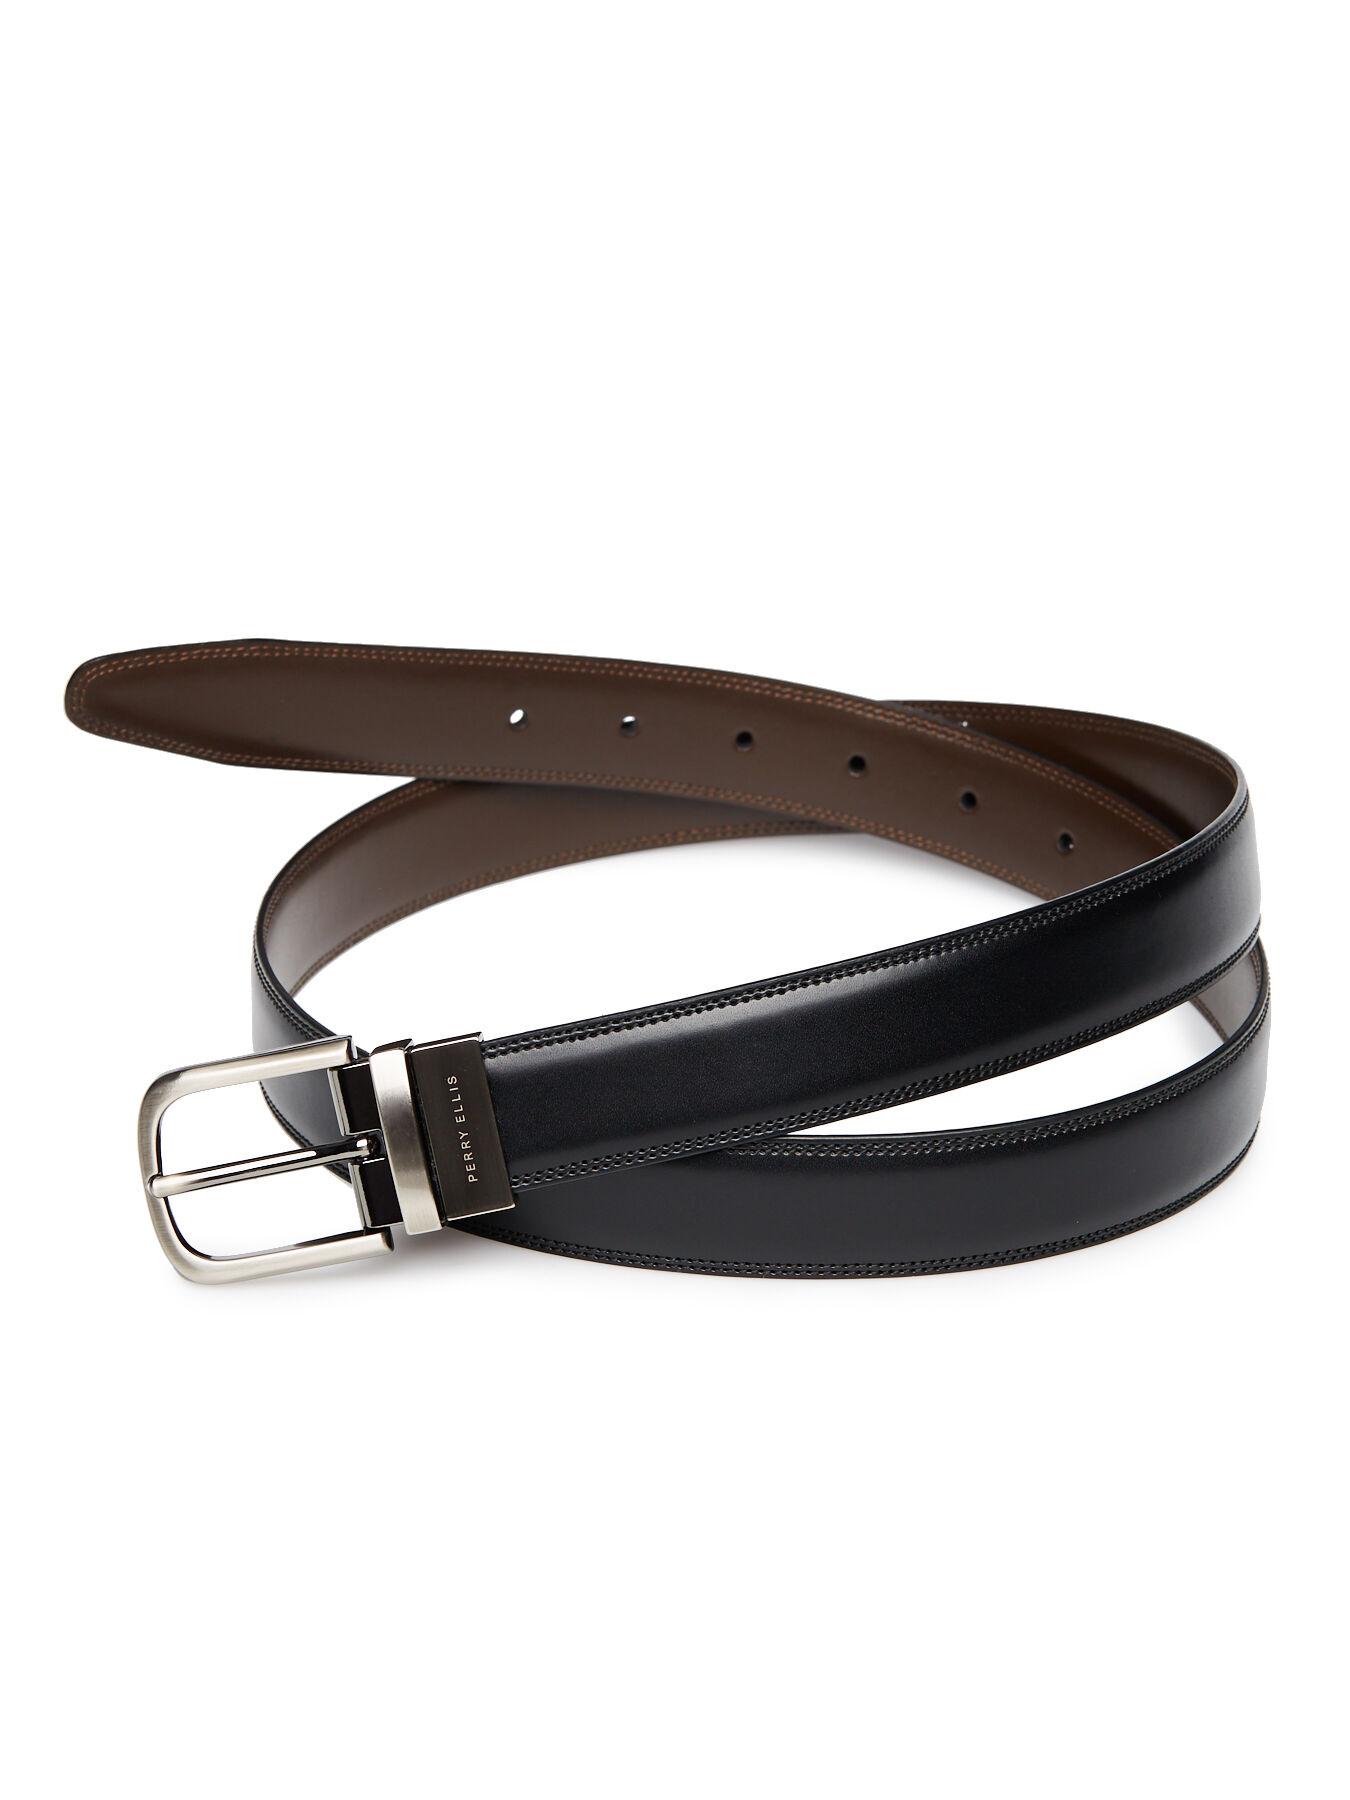 Perry Ellis Double Stitched Reversible Leather Belt in Black for Men - Lyst